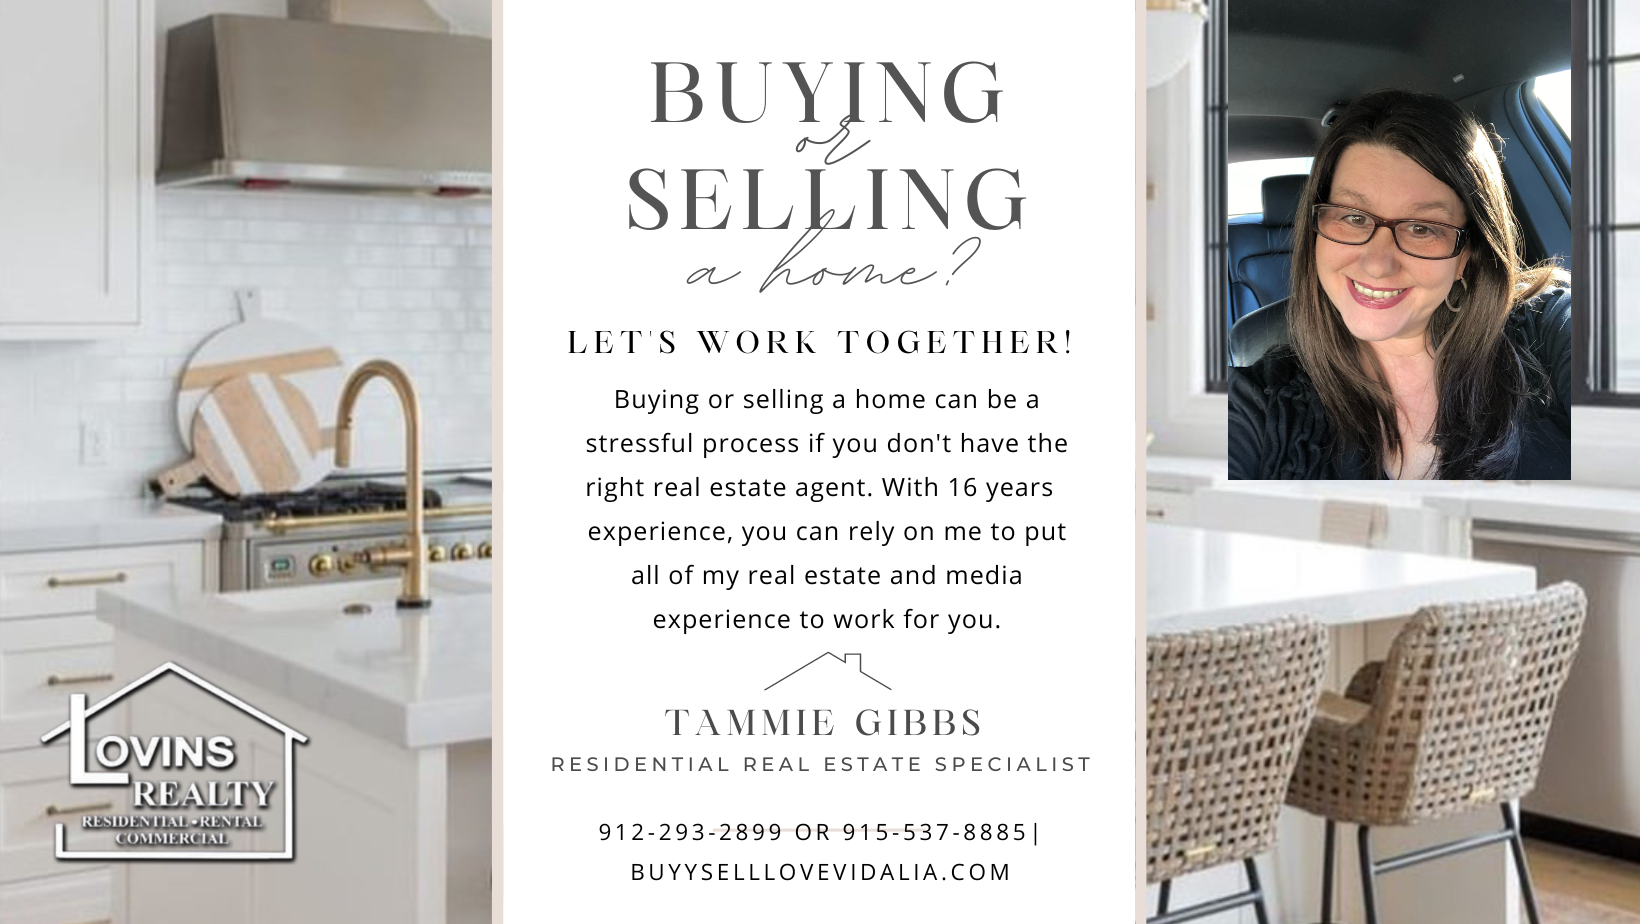 Buying or selling a home can be a stressful process if you don't have the right real estate agent. With 16 years  experience, you can rely on me to put all of my real estate and media experience to work for you.